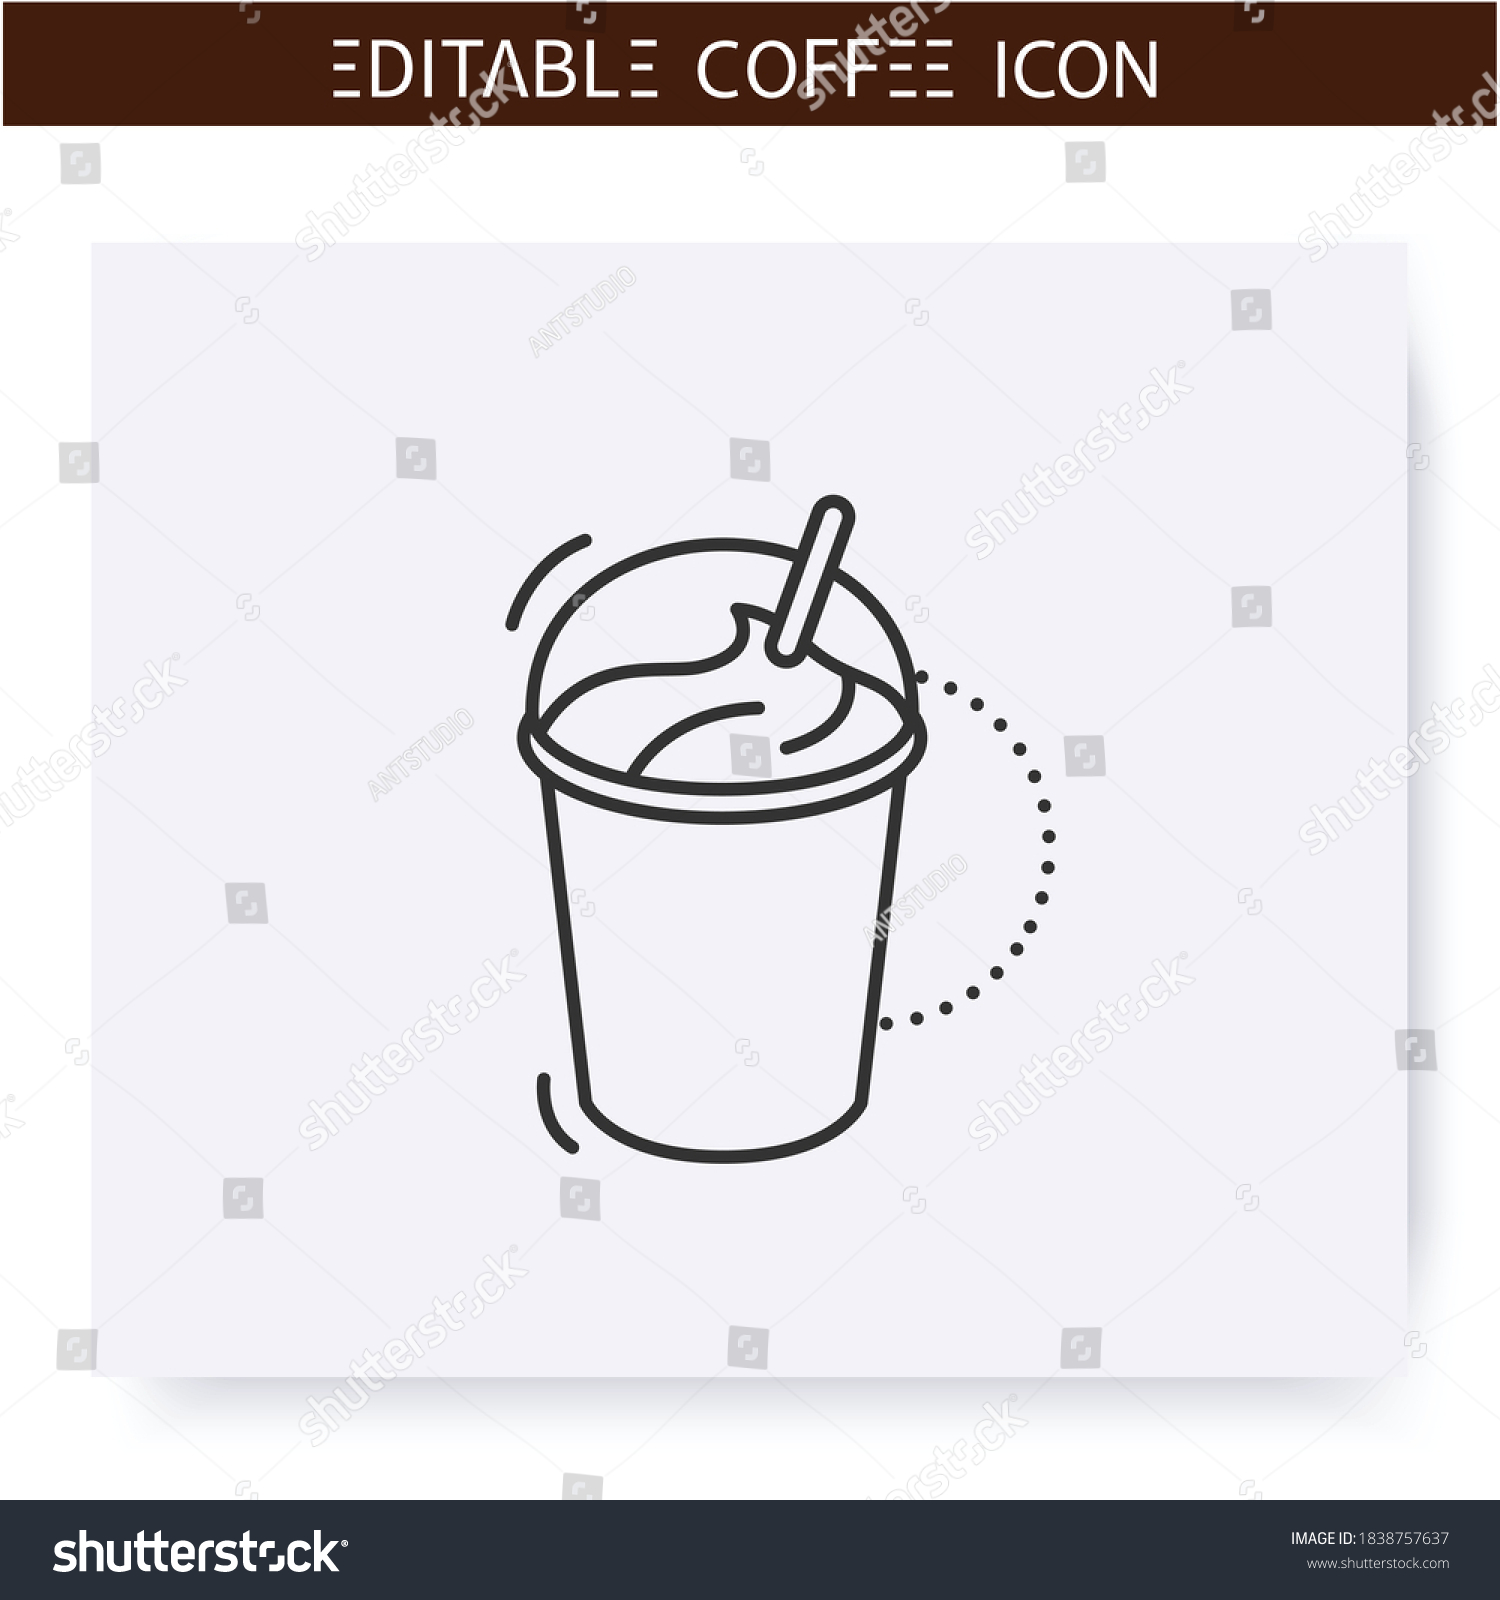 SVG of Coffee milkshake line icon.Type of coffee drink with blending milk and ice cream. Coffeehouse menu. Different caffeine drinks receipts concept. Isolated vector illustration. Editable stroke svg